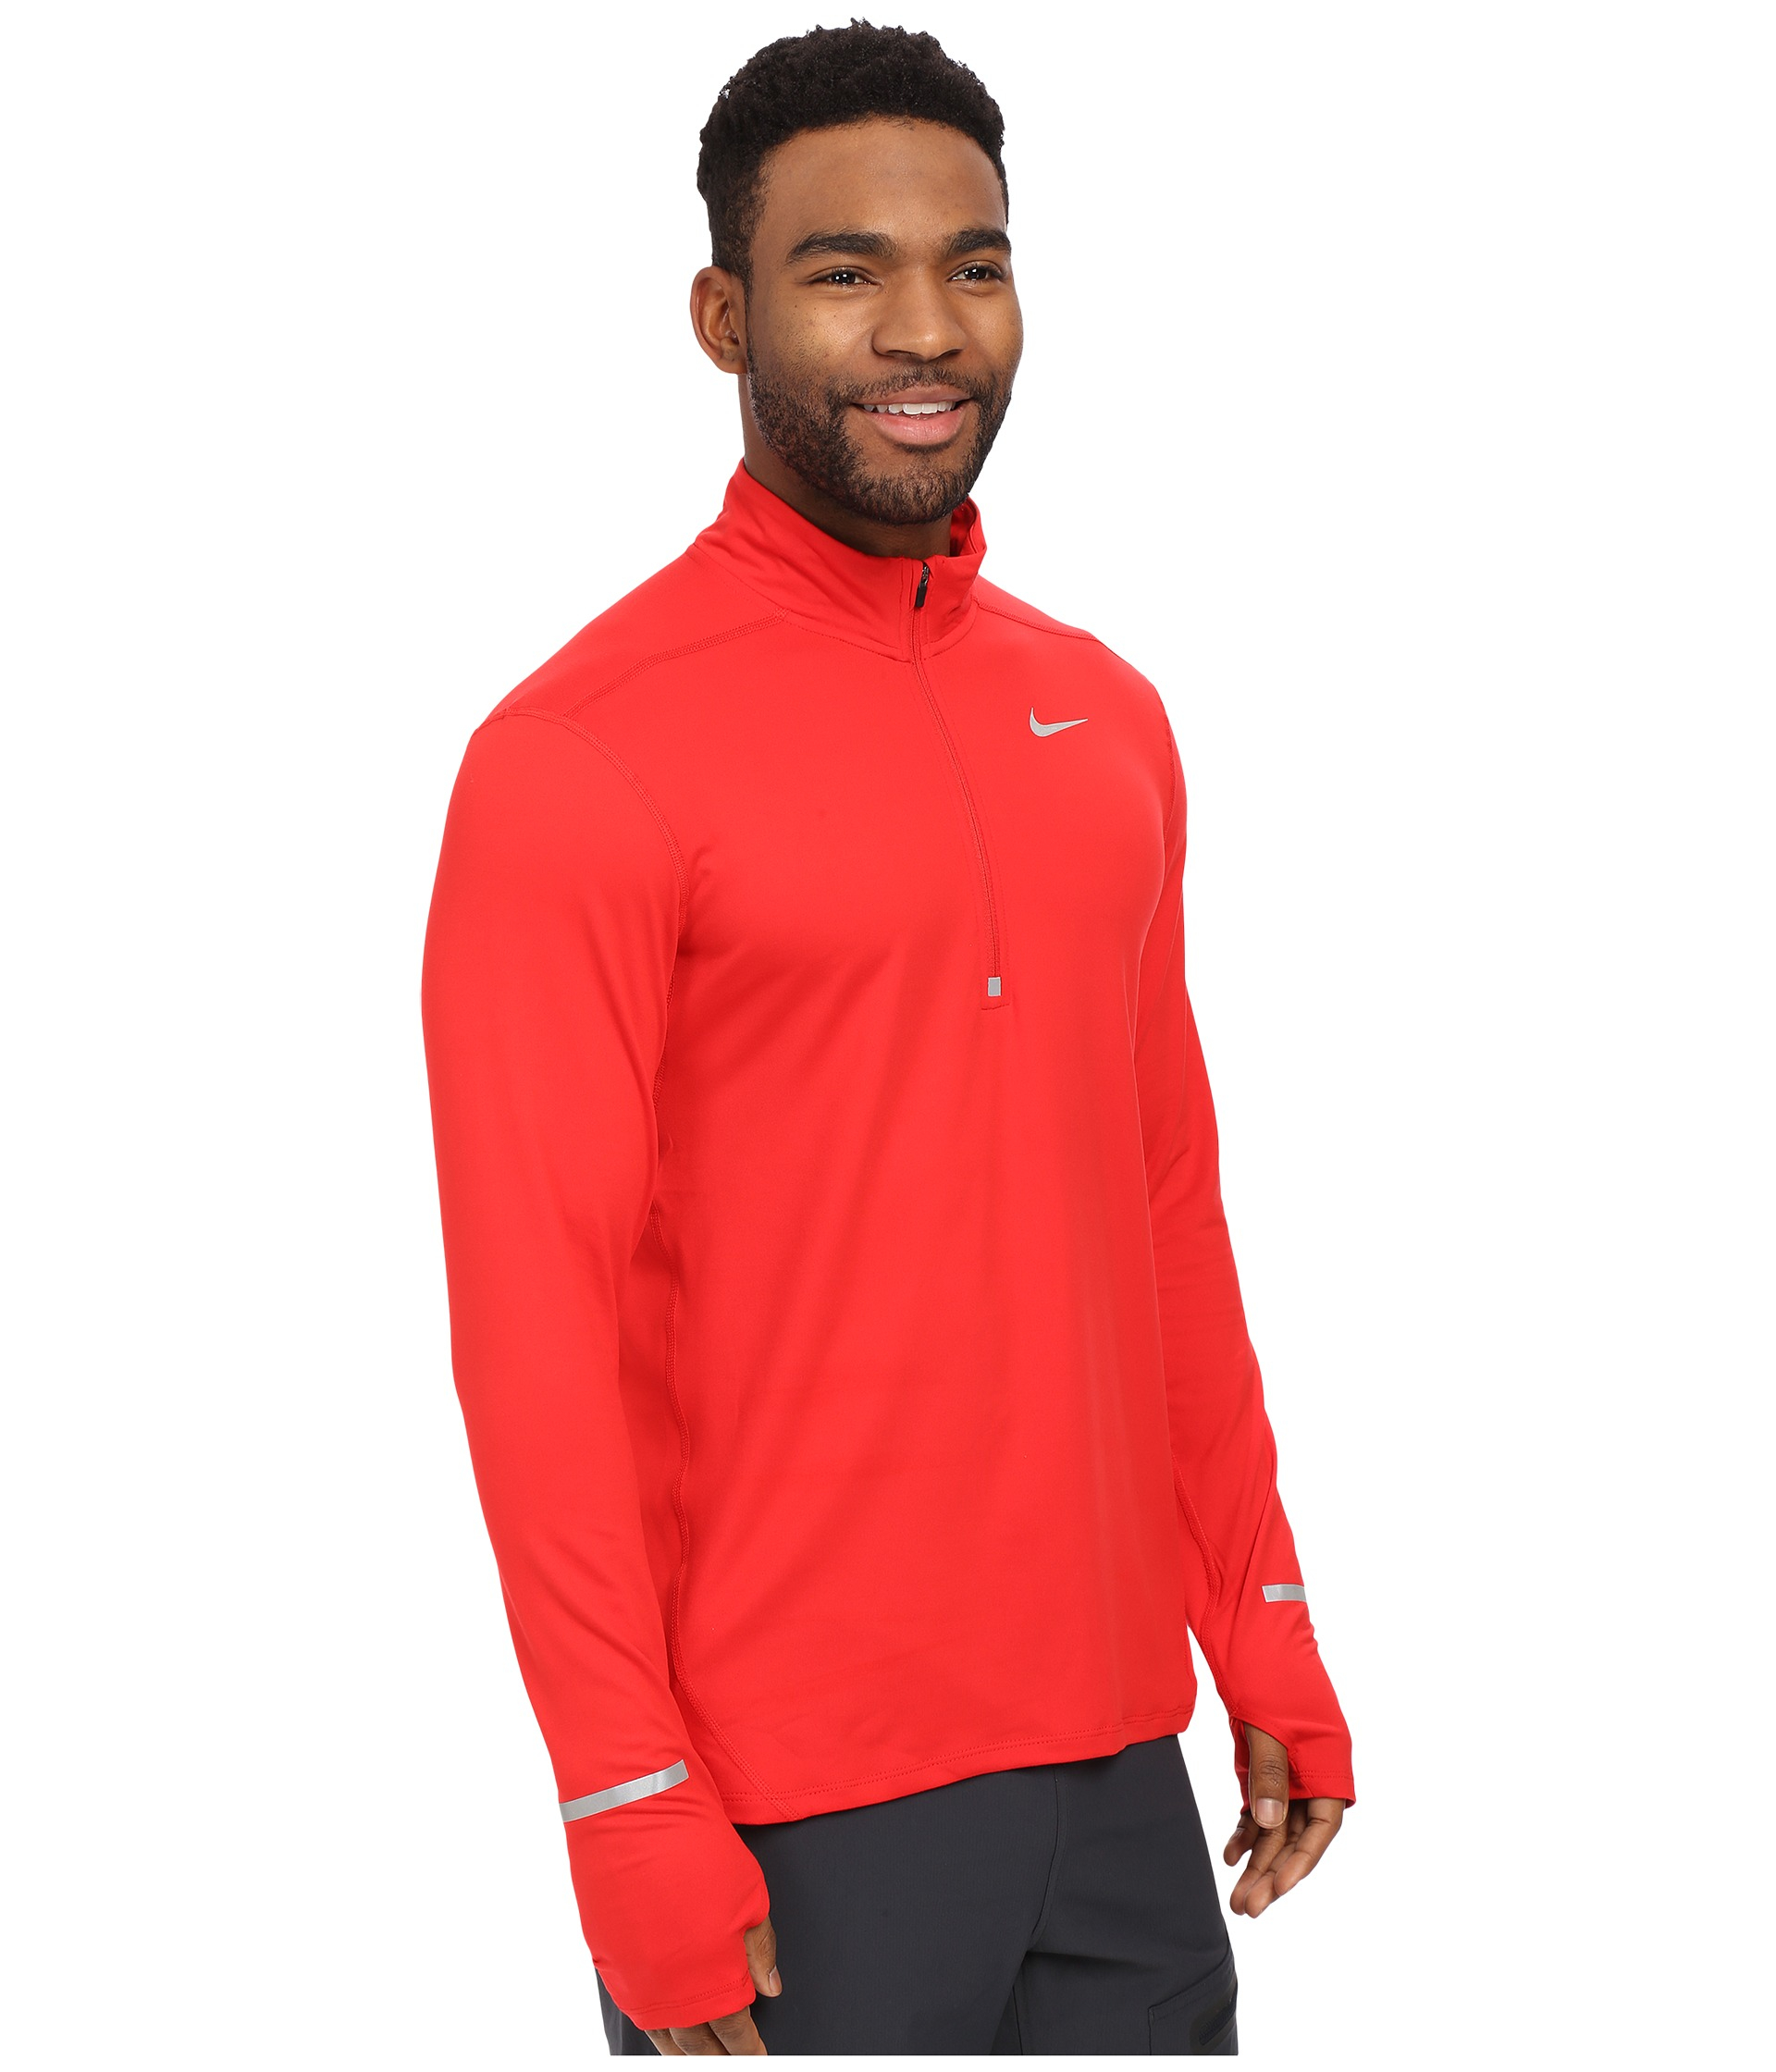 Nike Dri-fit™ Element Half-zip Pullover in Red for Men - Lyst